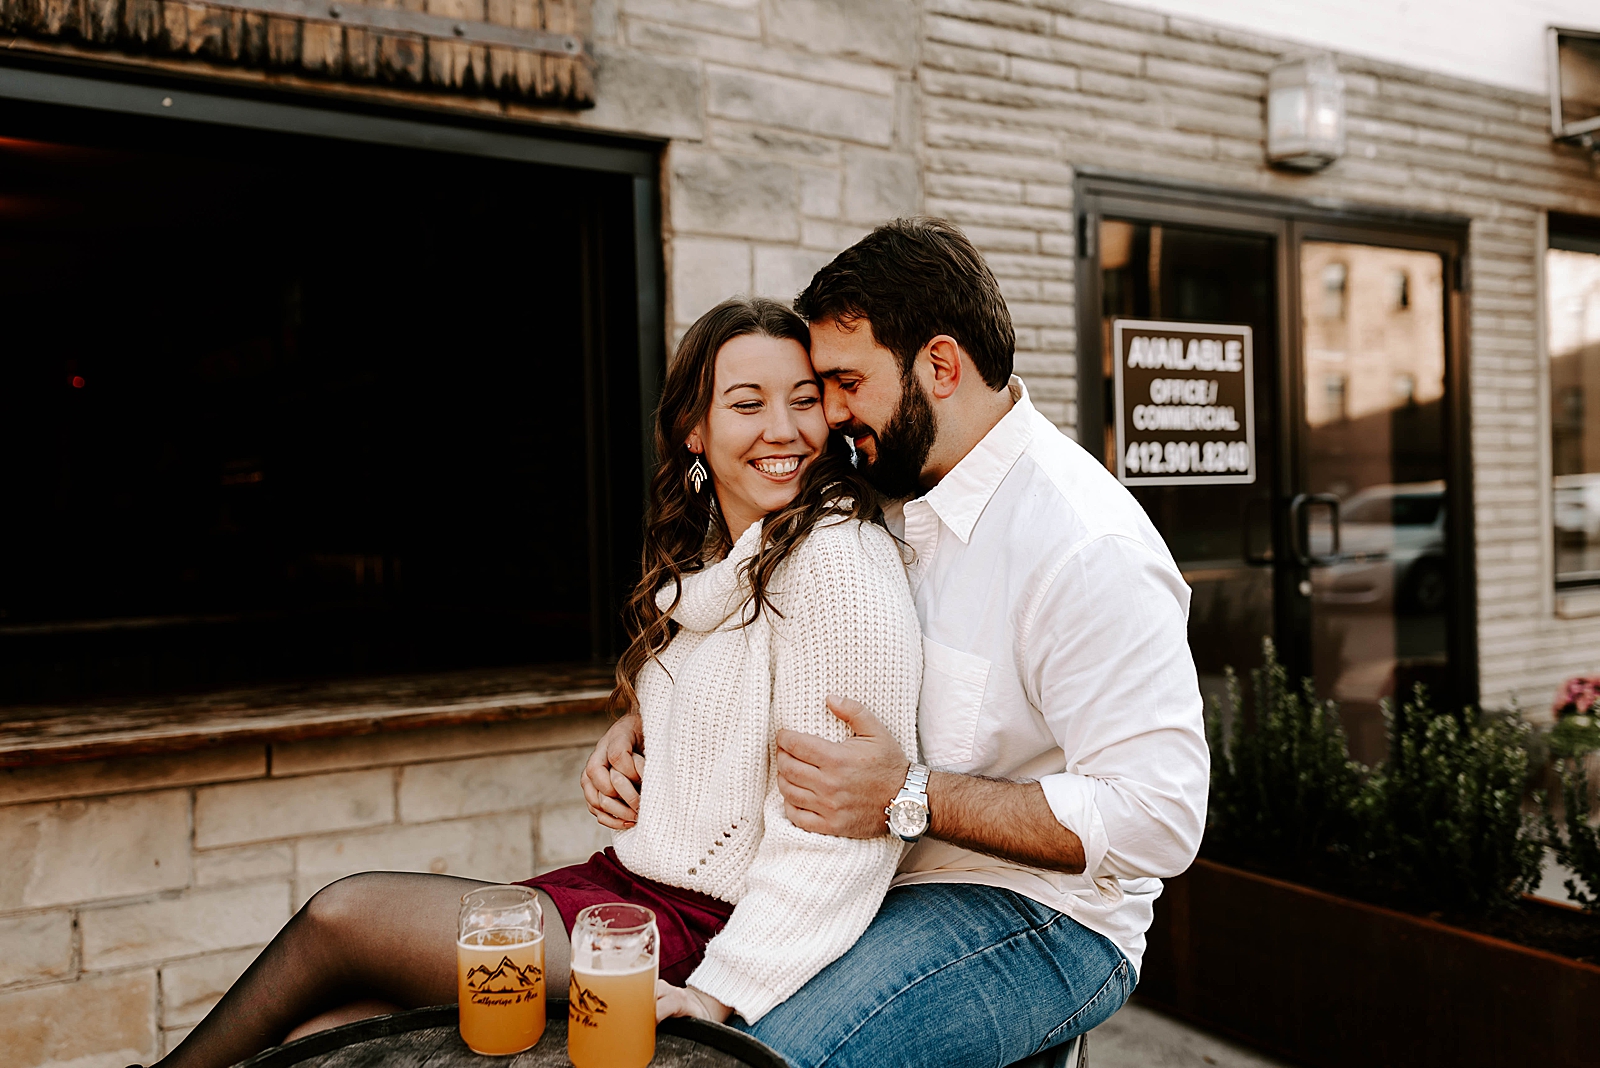 creative engagement photo ideas; save the date ideas